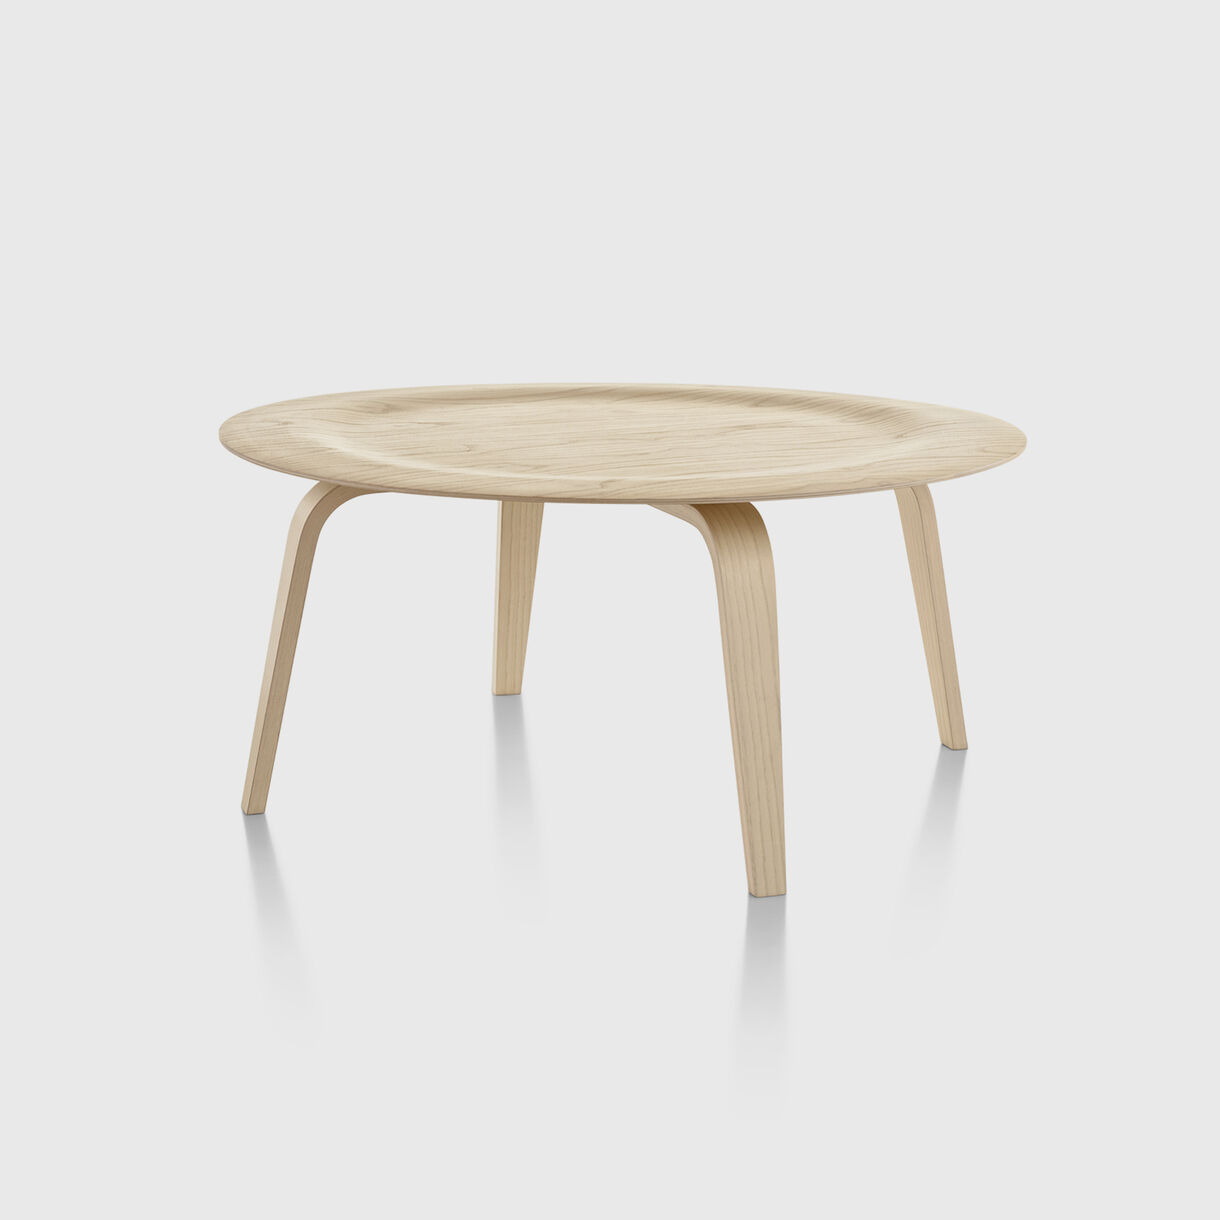 Eames Moulded Plywood Coffee Table, Wood Base, White Ash